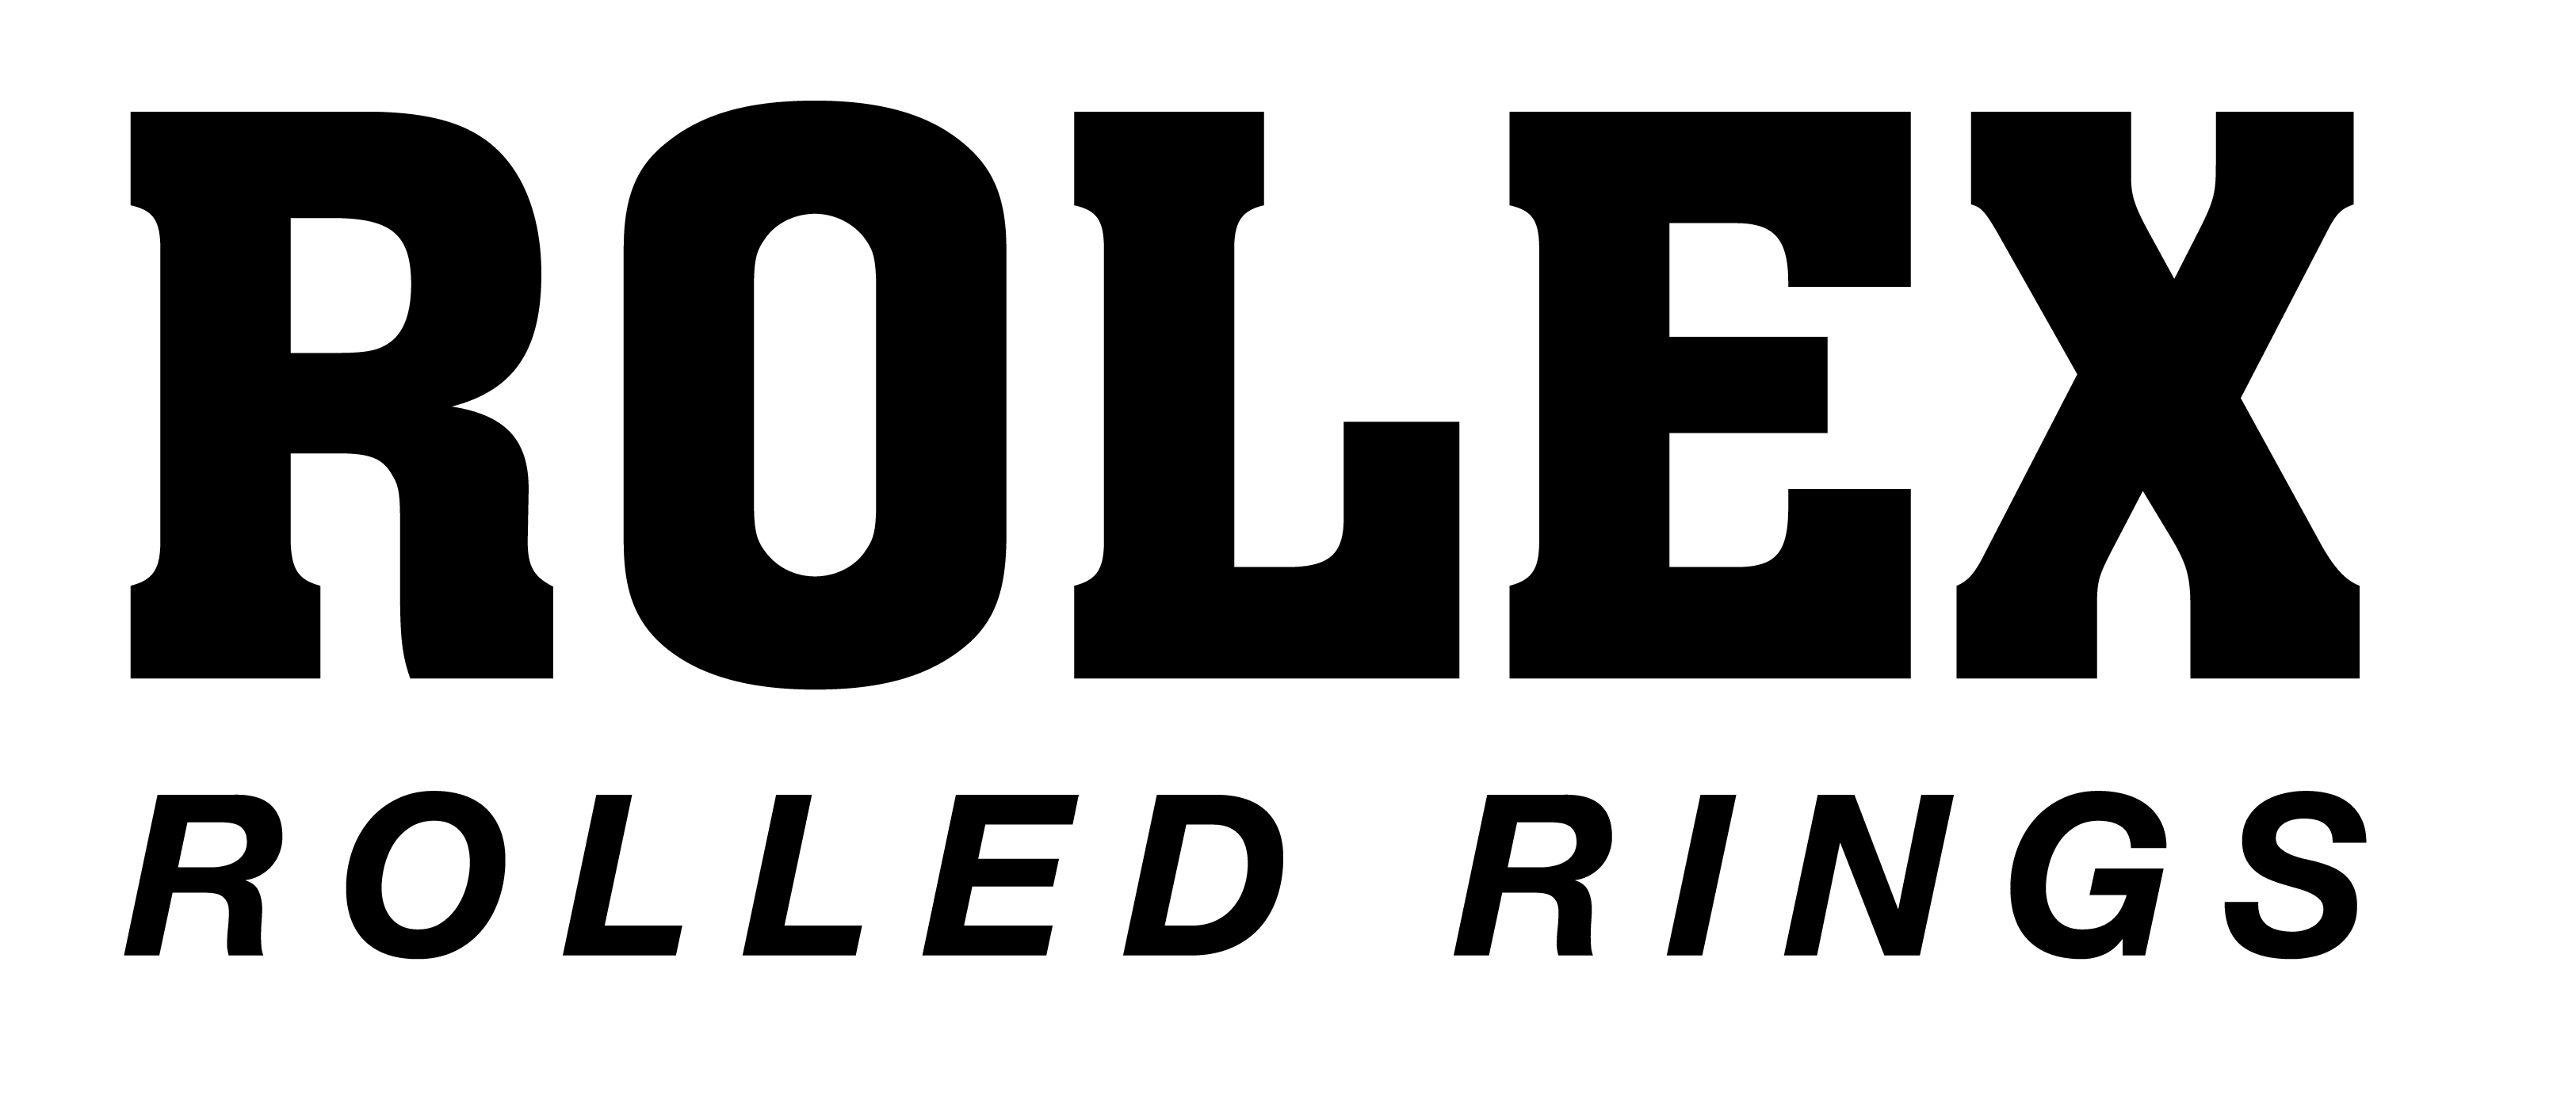 Rolex Rings Limited Initial Public Offer to open on July 28, 2021